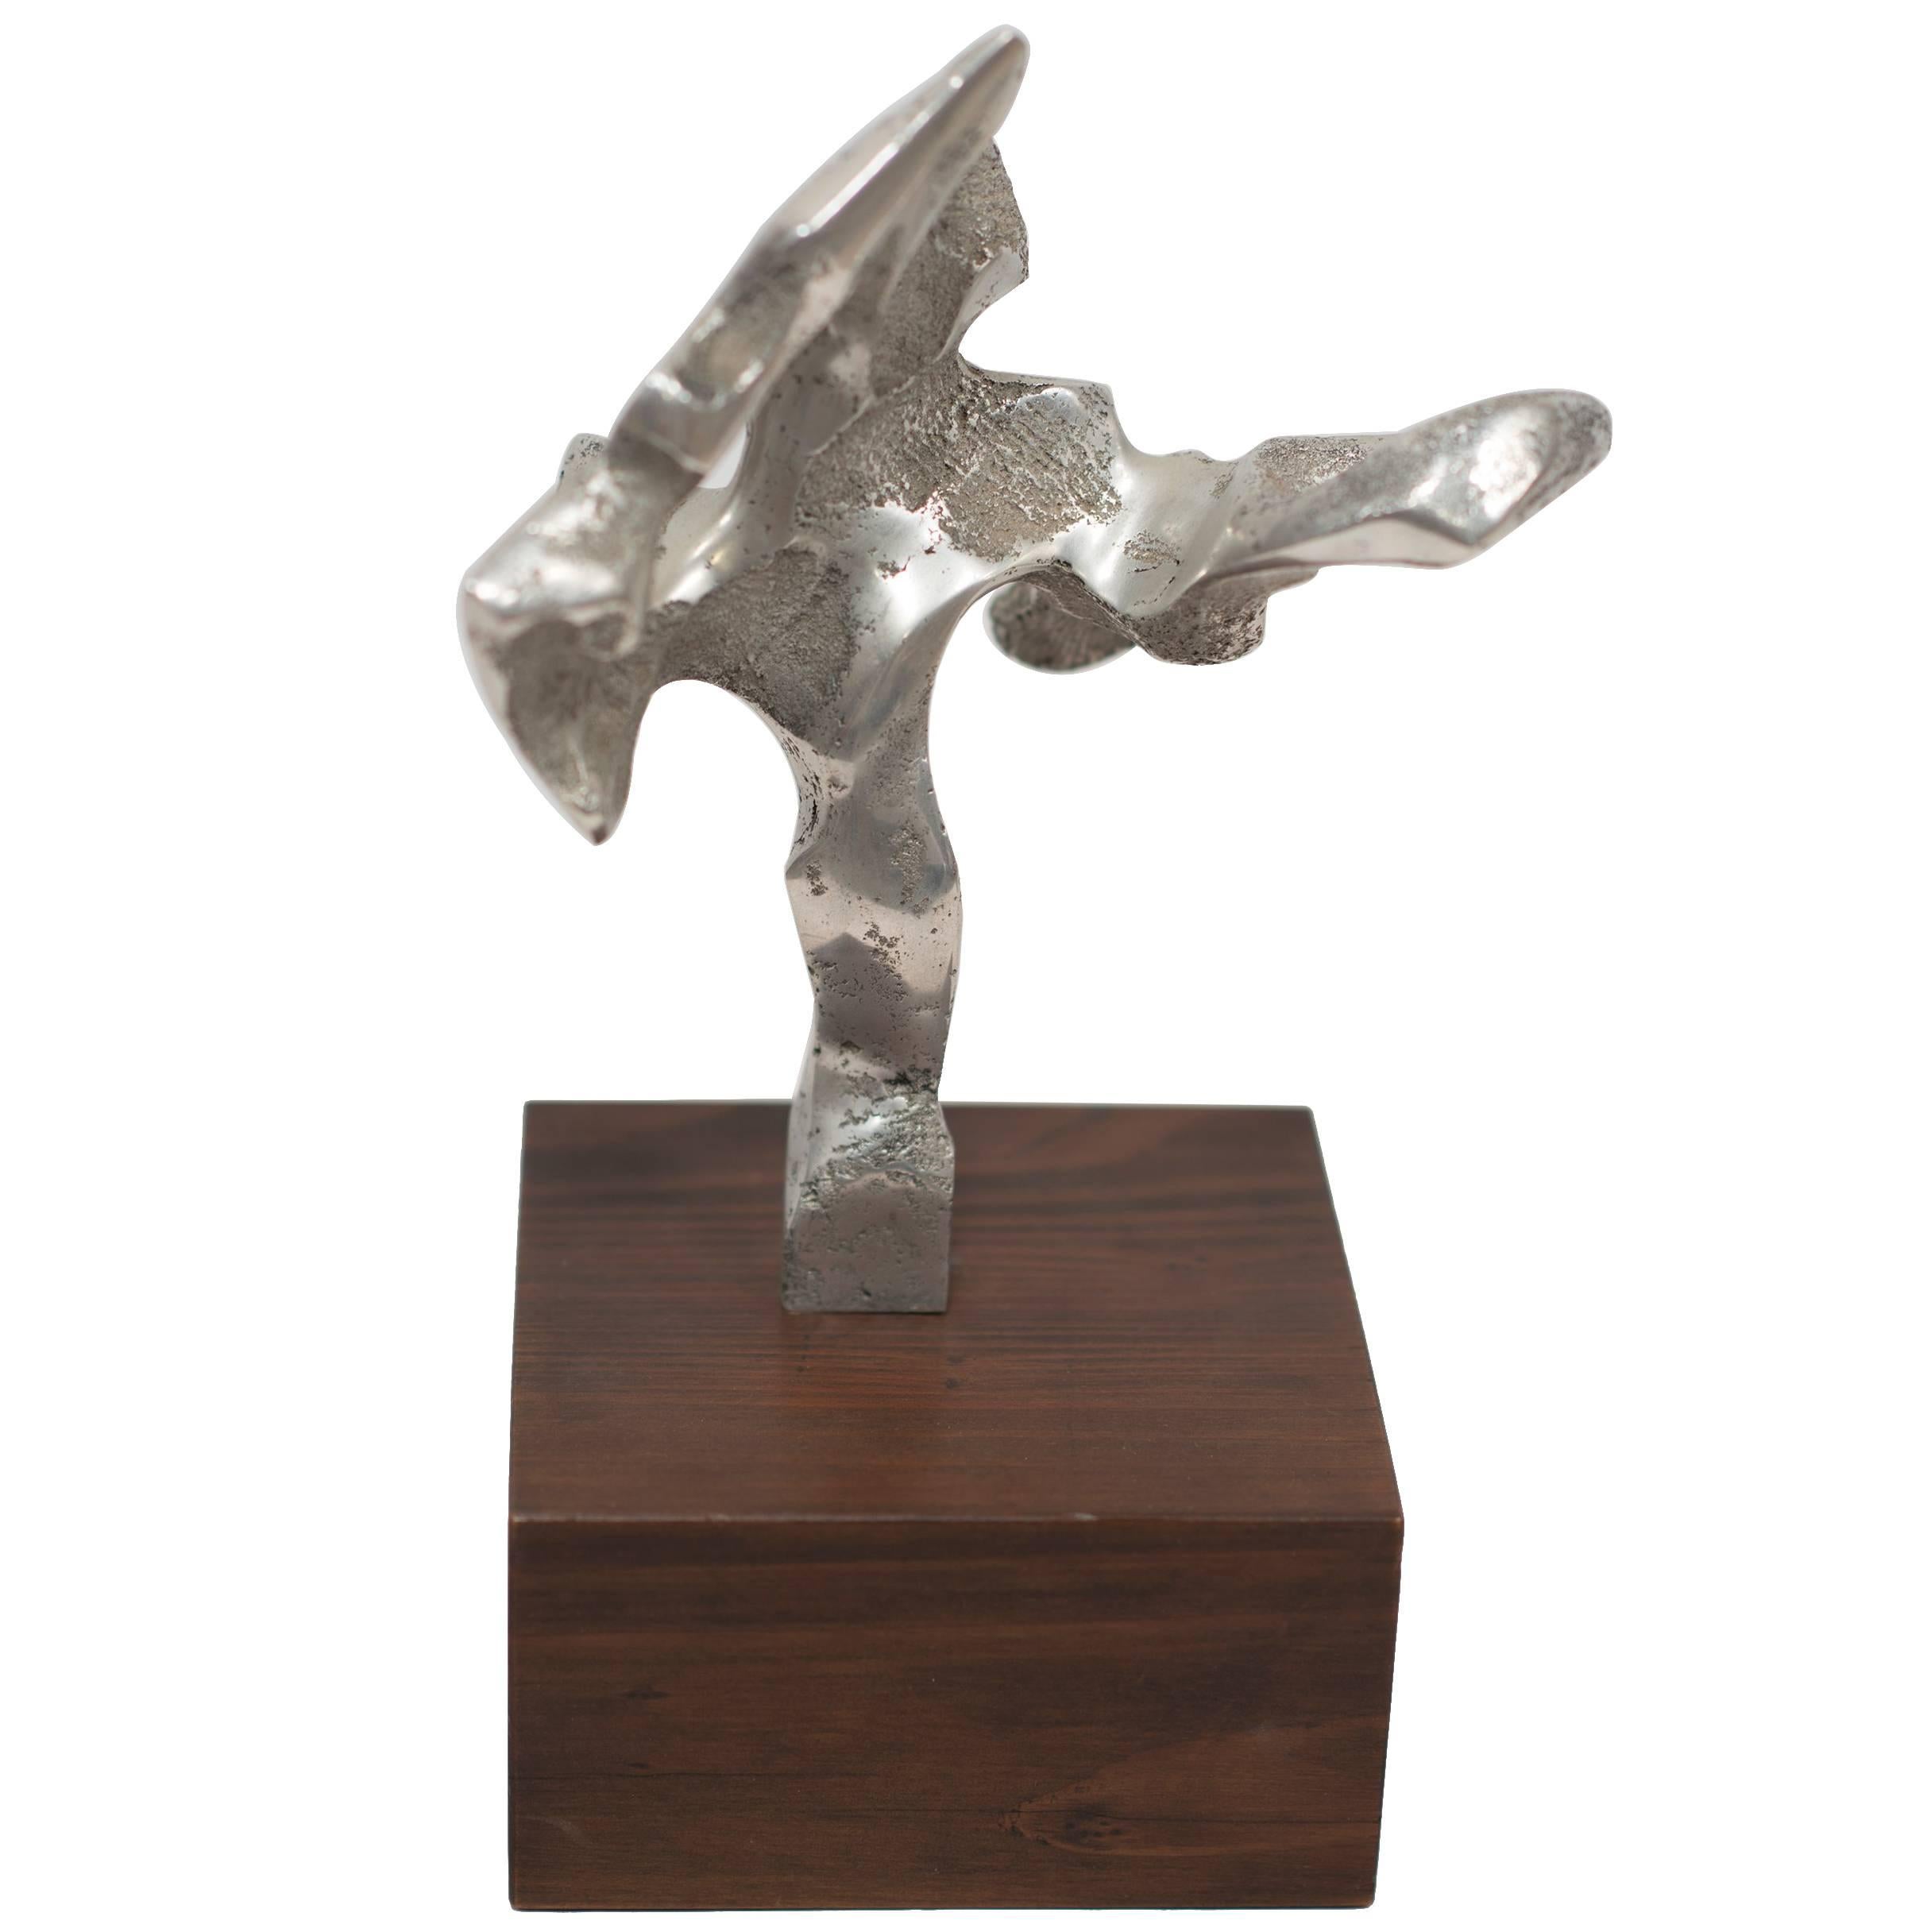 A detailed abstract metal sculpture with a wooden base. A small table-top gem of intricate details and refined free forms. The designer and/or artist is unknown but the source of this piece is from an extremely reputable dealer and purchased at a